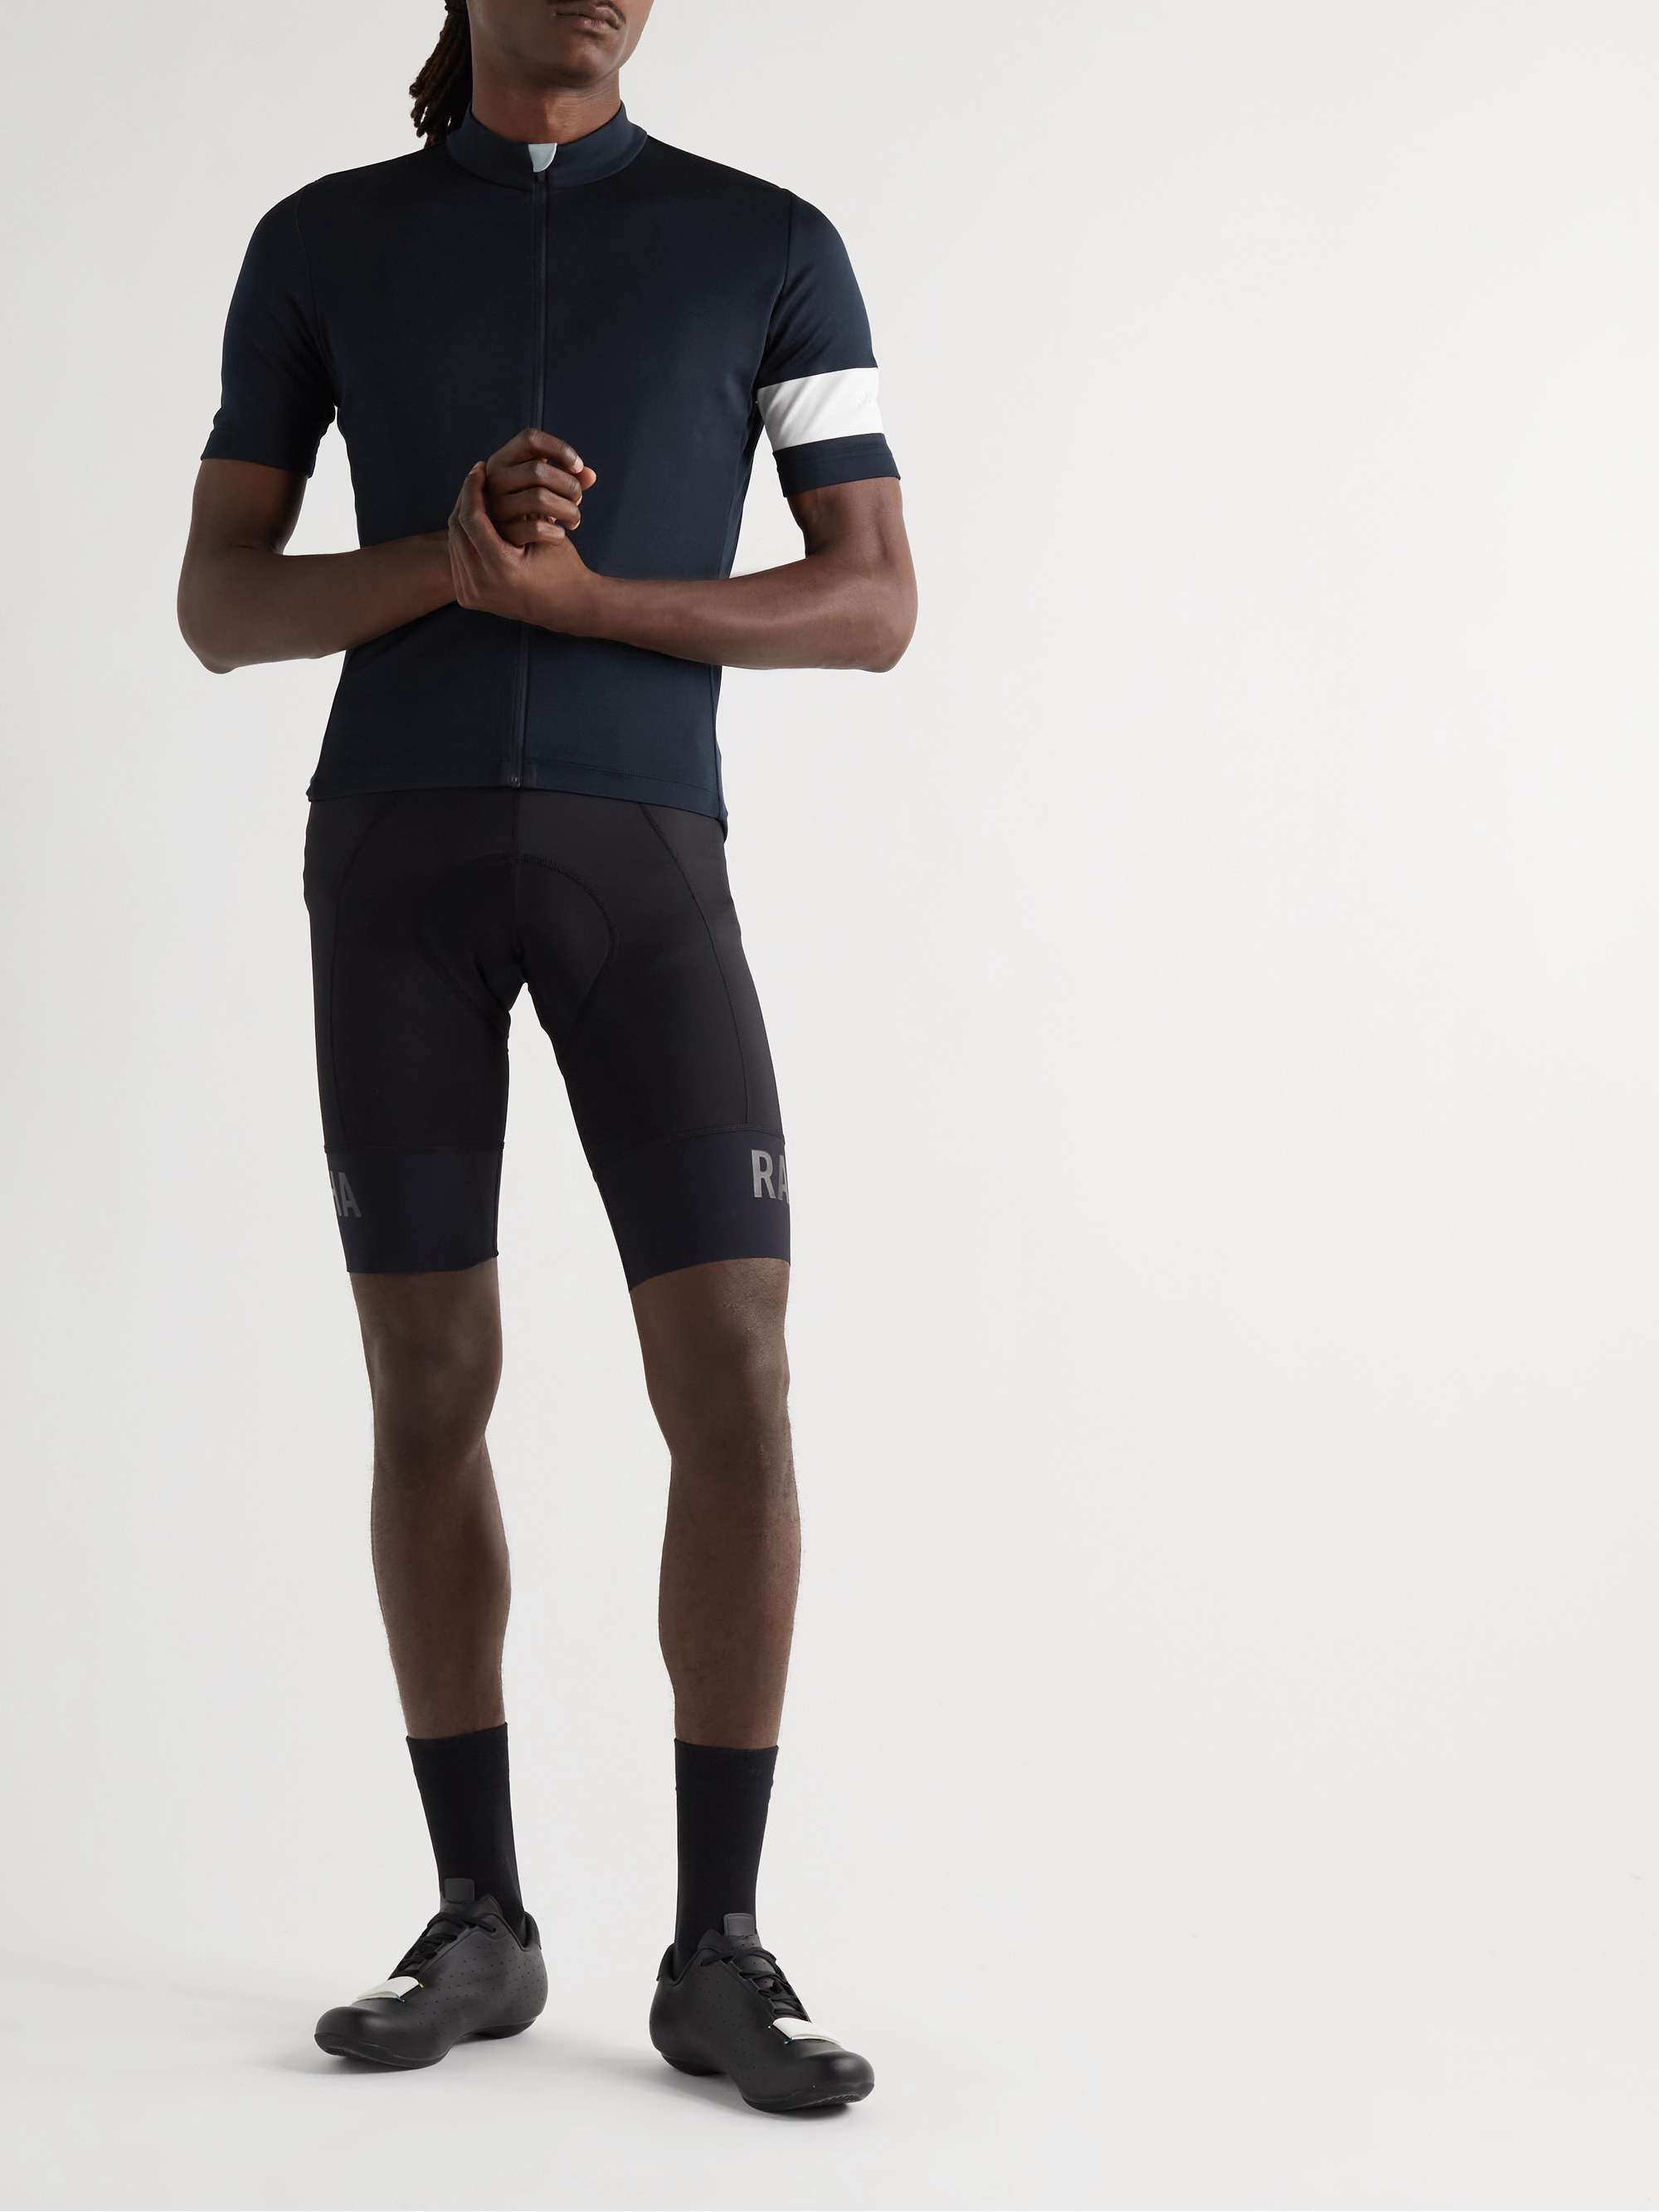 RAPHA Classic Two-Tone Recycled Cycling Jersey for Men | MR PORTER